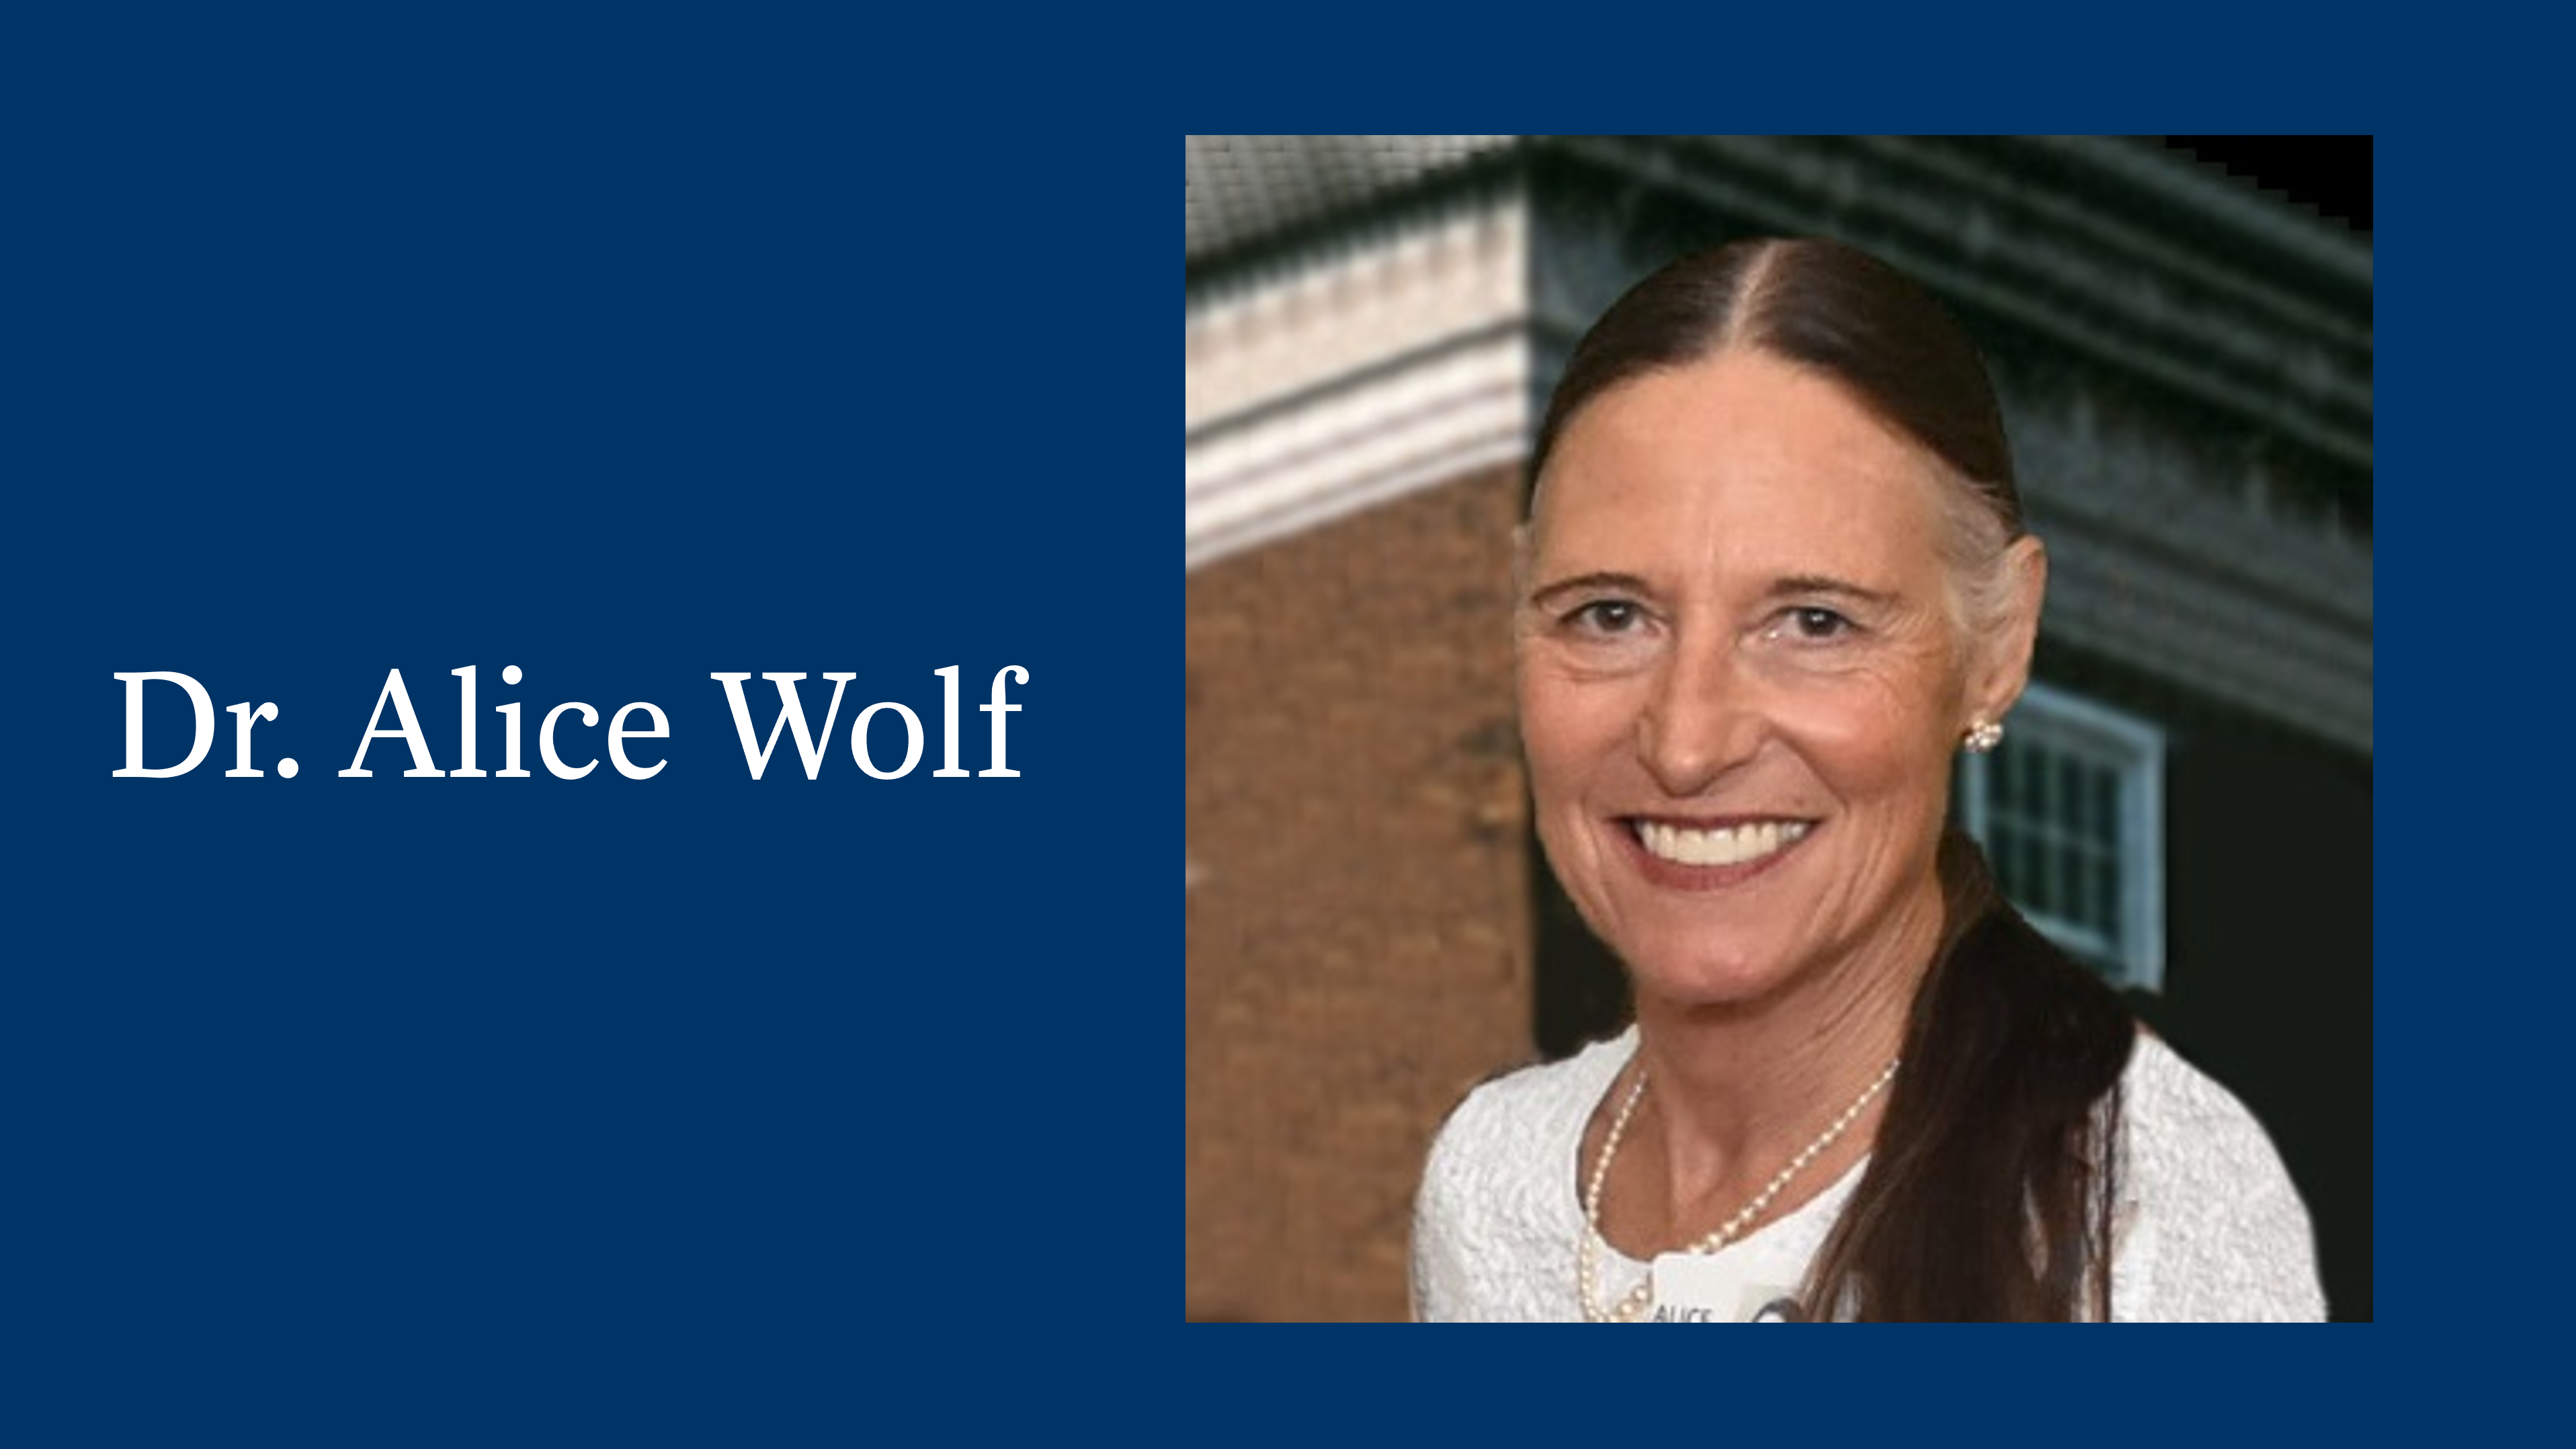 Dr. Alice Wolf